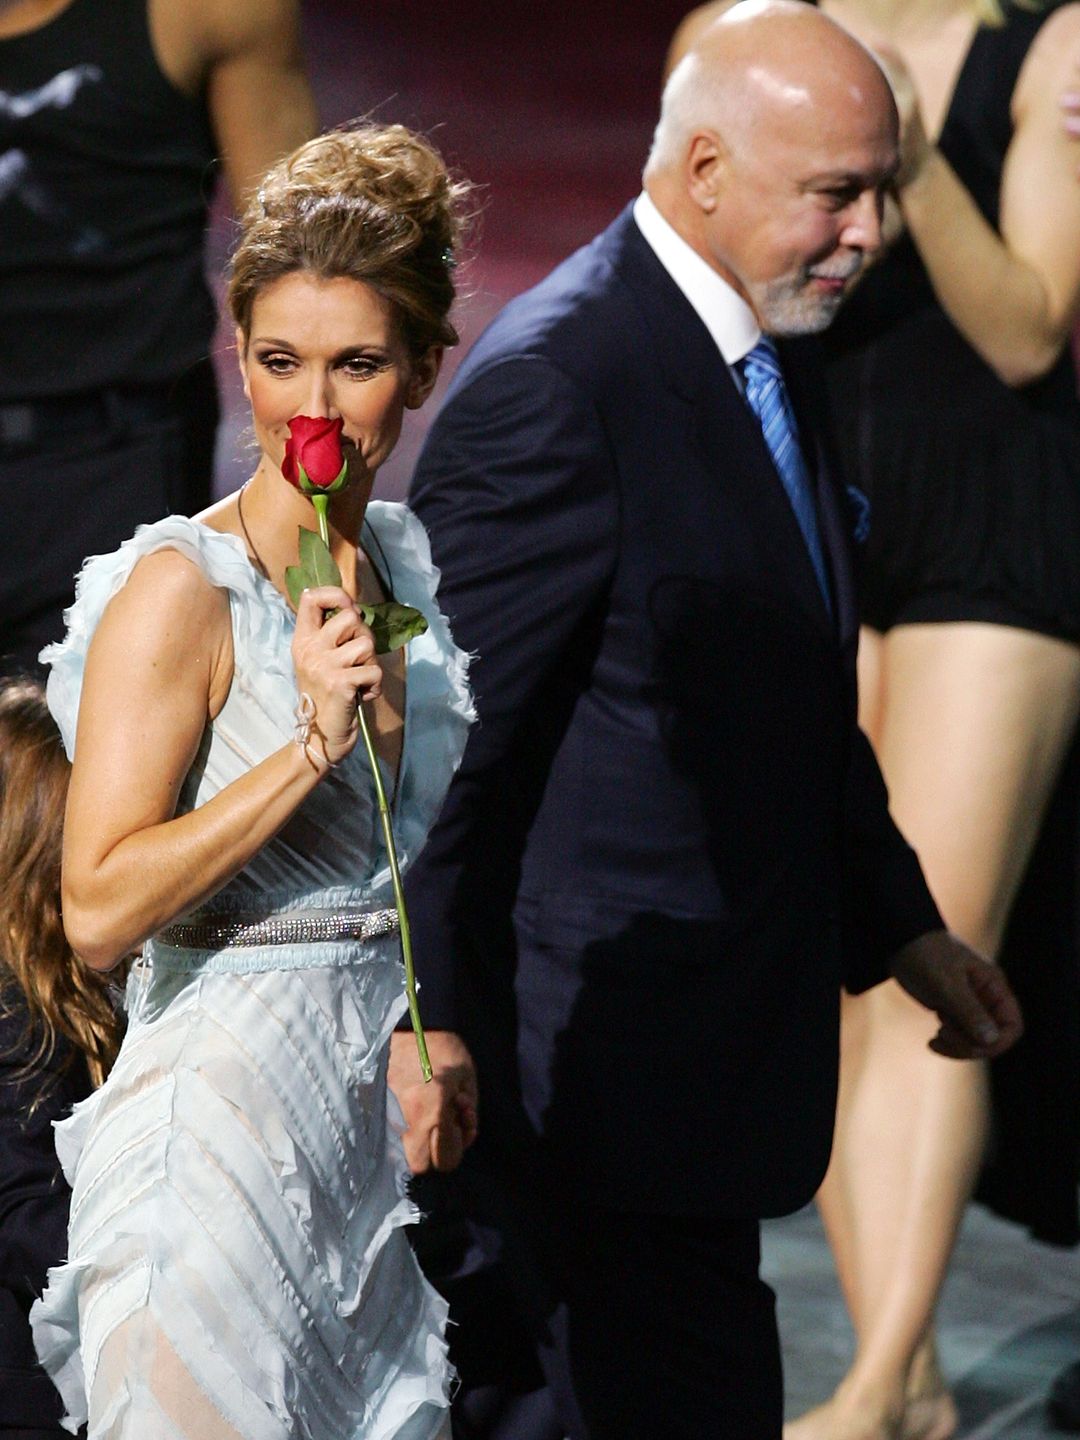 Singer Celine Dion (L) is escorted by her husband and manager Rene Angelil as she leaves the stage after the last performance of her show "A New Day..." at The Colosseum at Caesars Palace December 15, 2007 in Las Vegas, Nevada. Nearly three million people watched Dion perform 717 shows since it opened in March 2003.  (Photo by Ethan Miller/Getty Images for AEG Live/Concerts West)